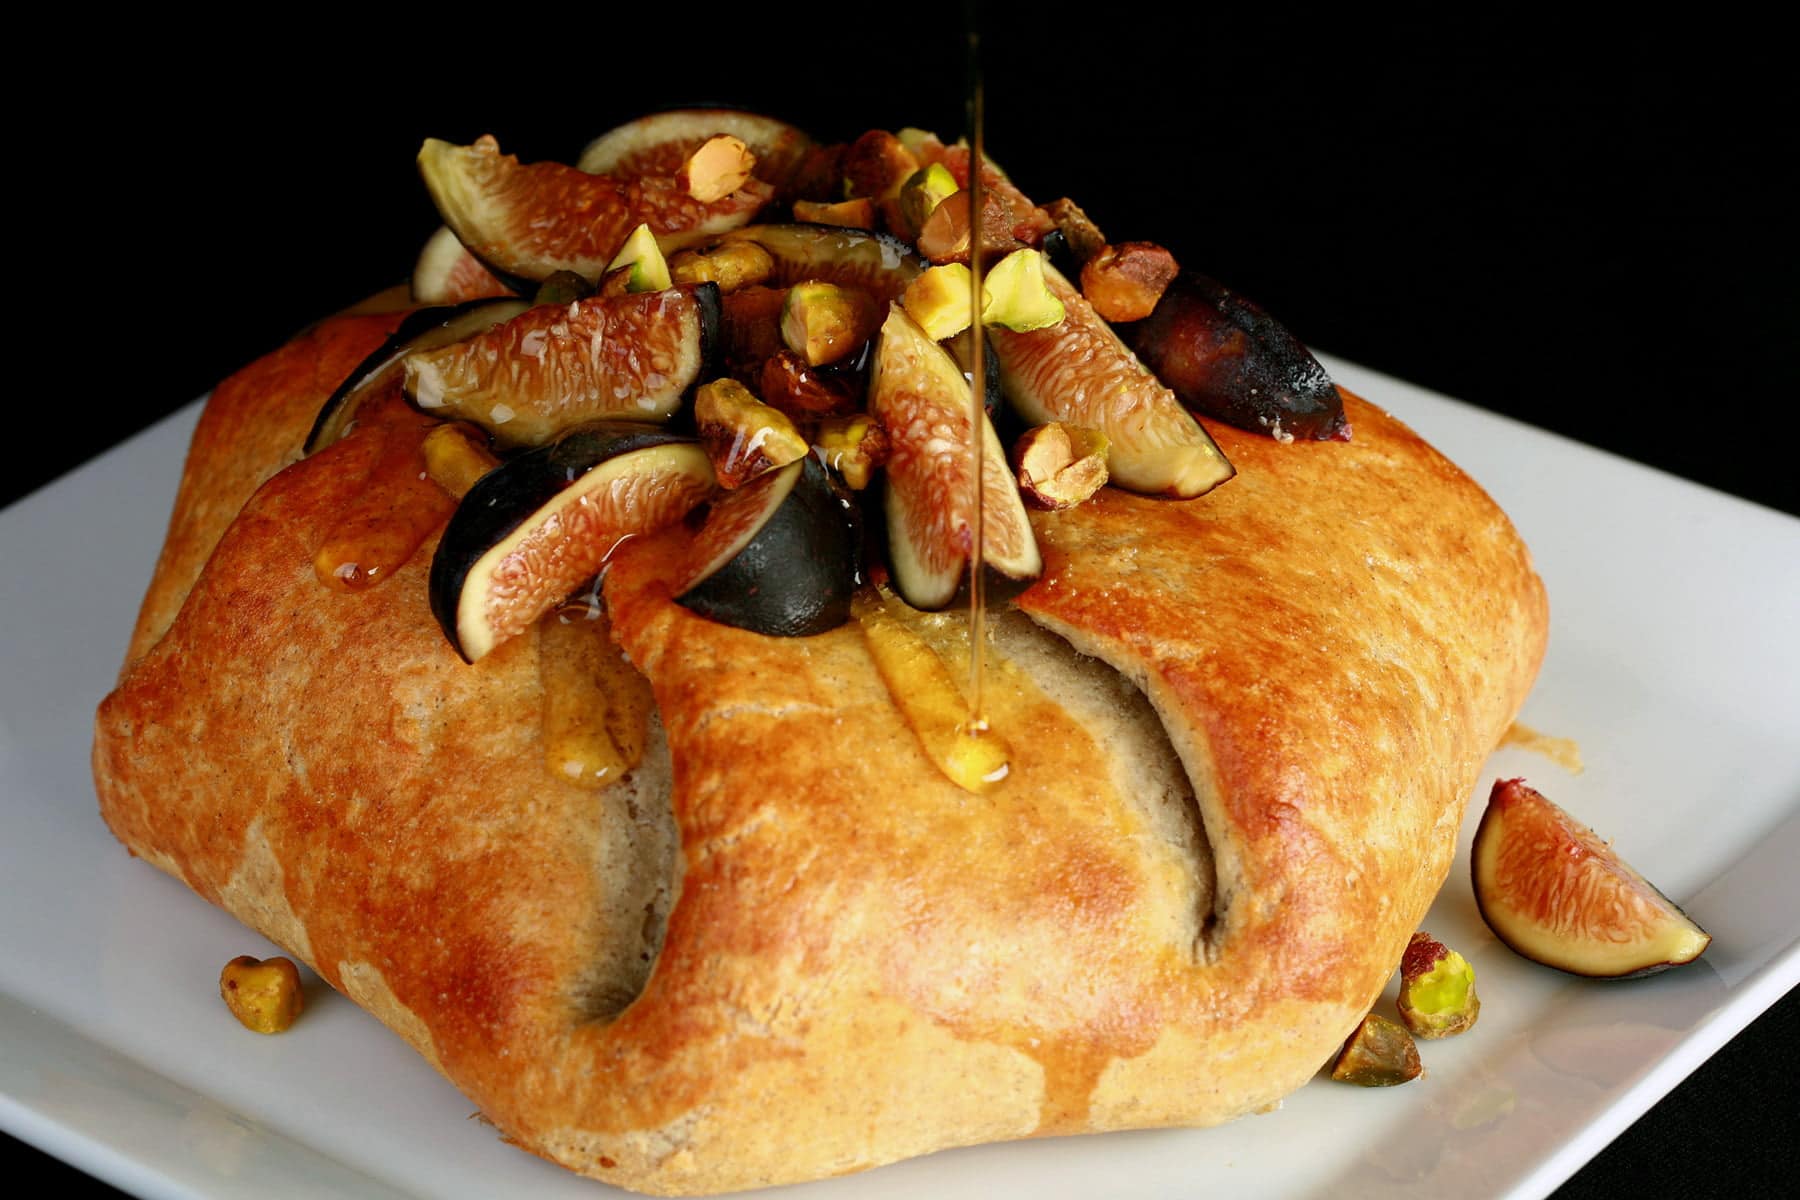 Sliced figs, pistachio, and honey top a round, gathered, golden brown pastry.